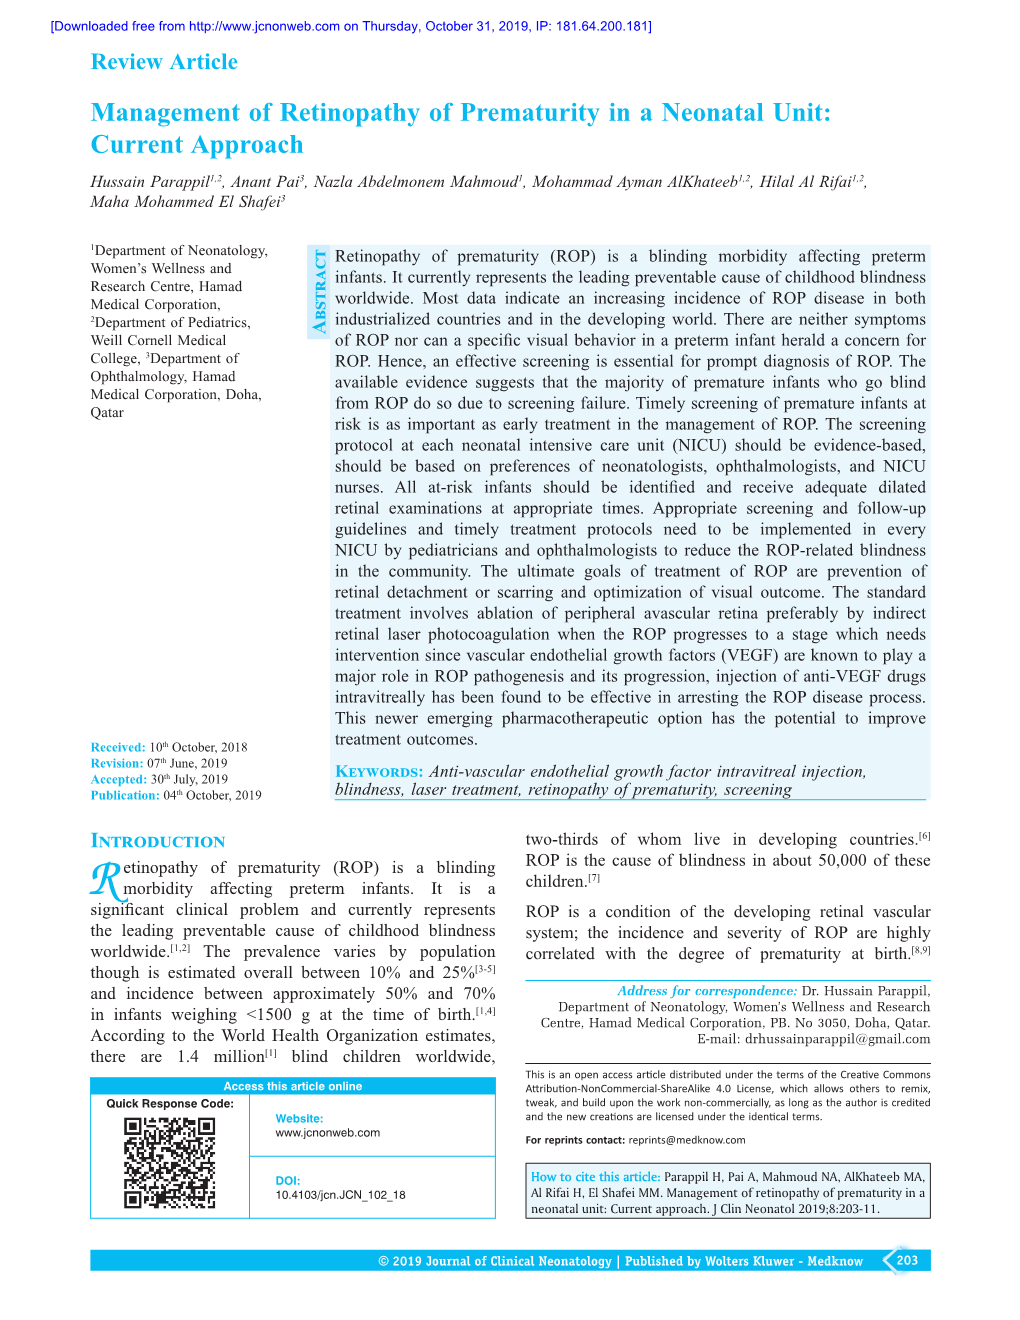 Management of Retinopathy of Prematurity in a Neonatal Unit